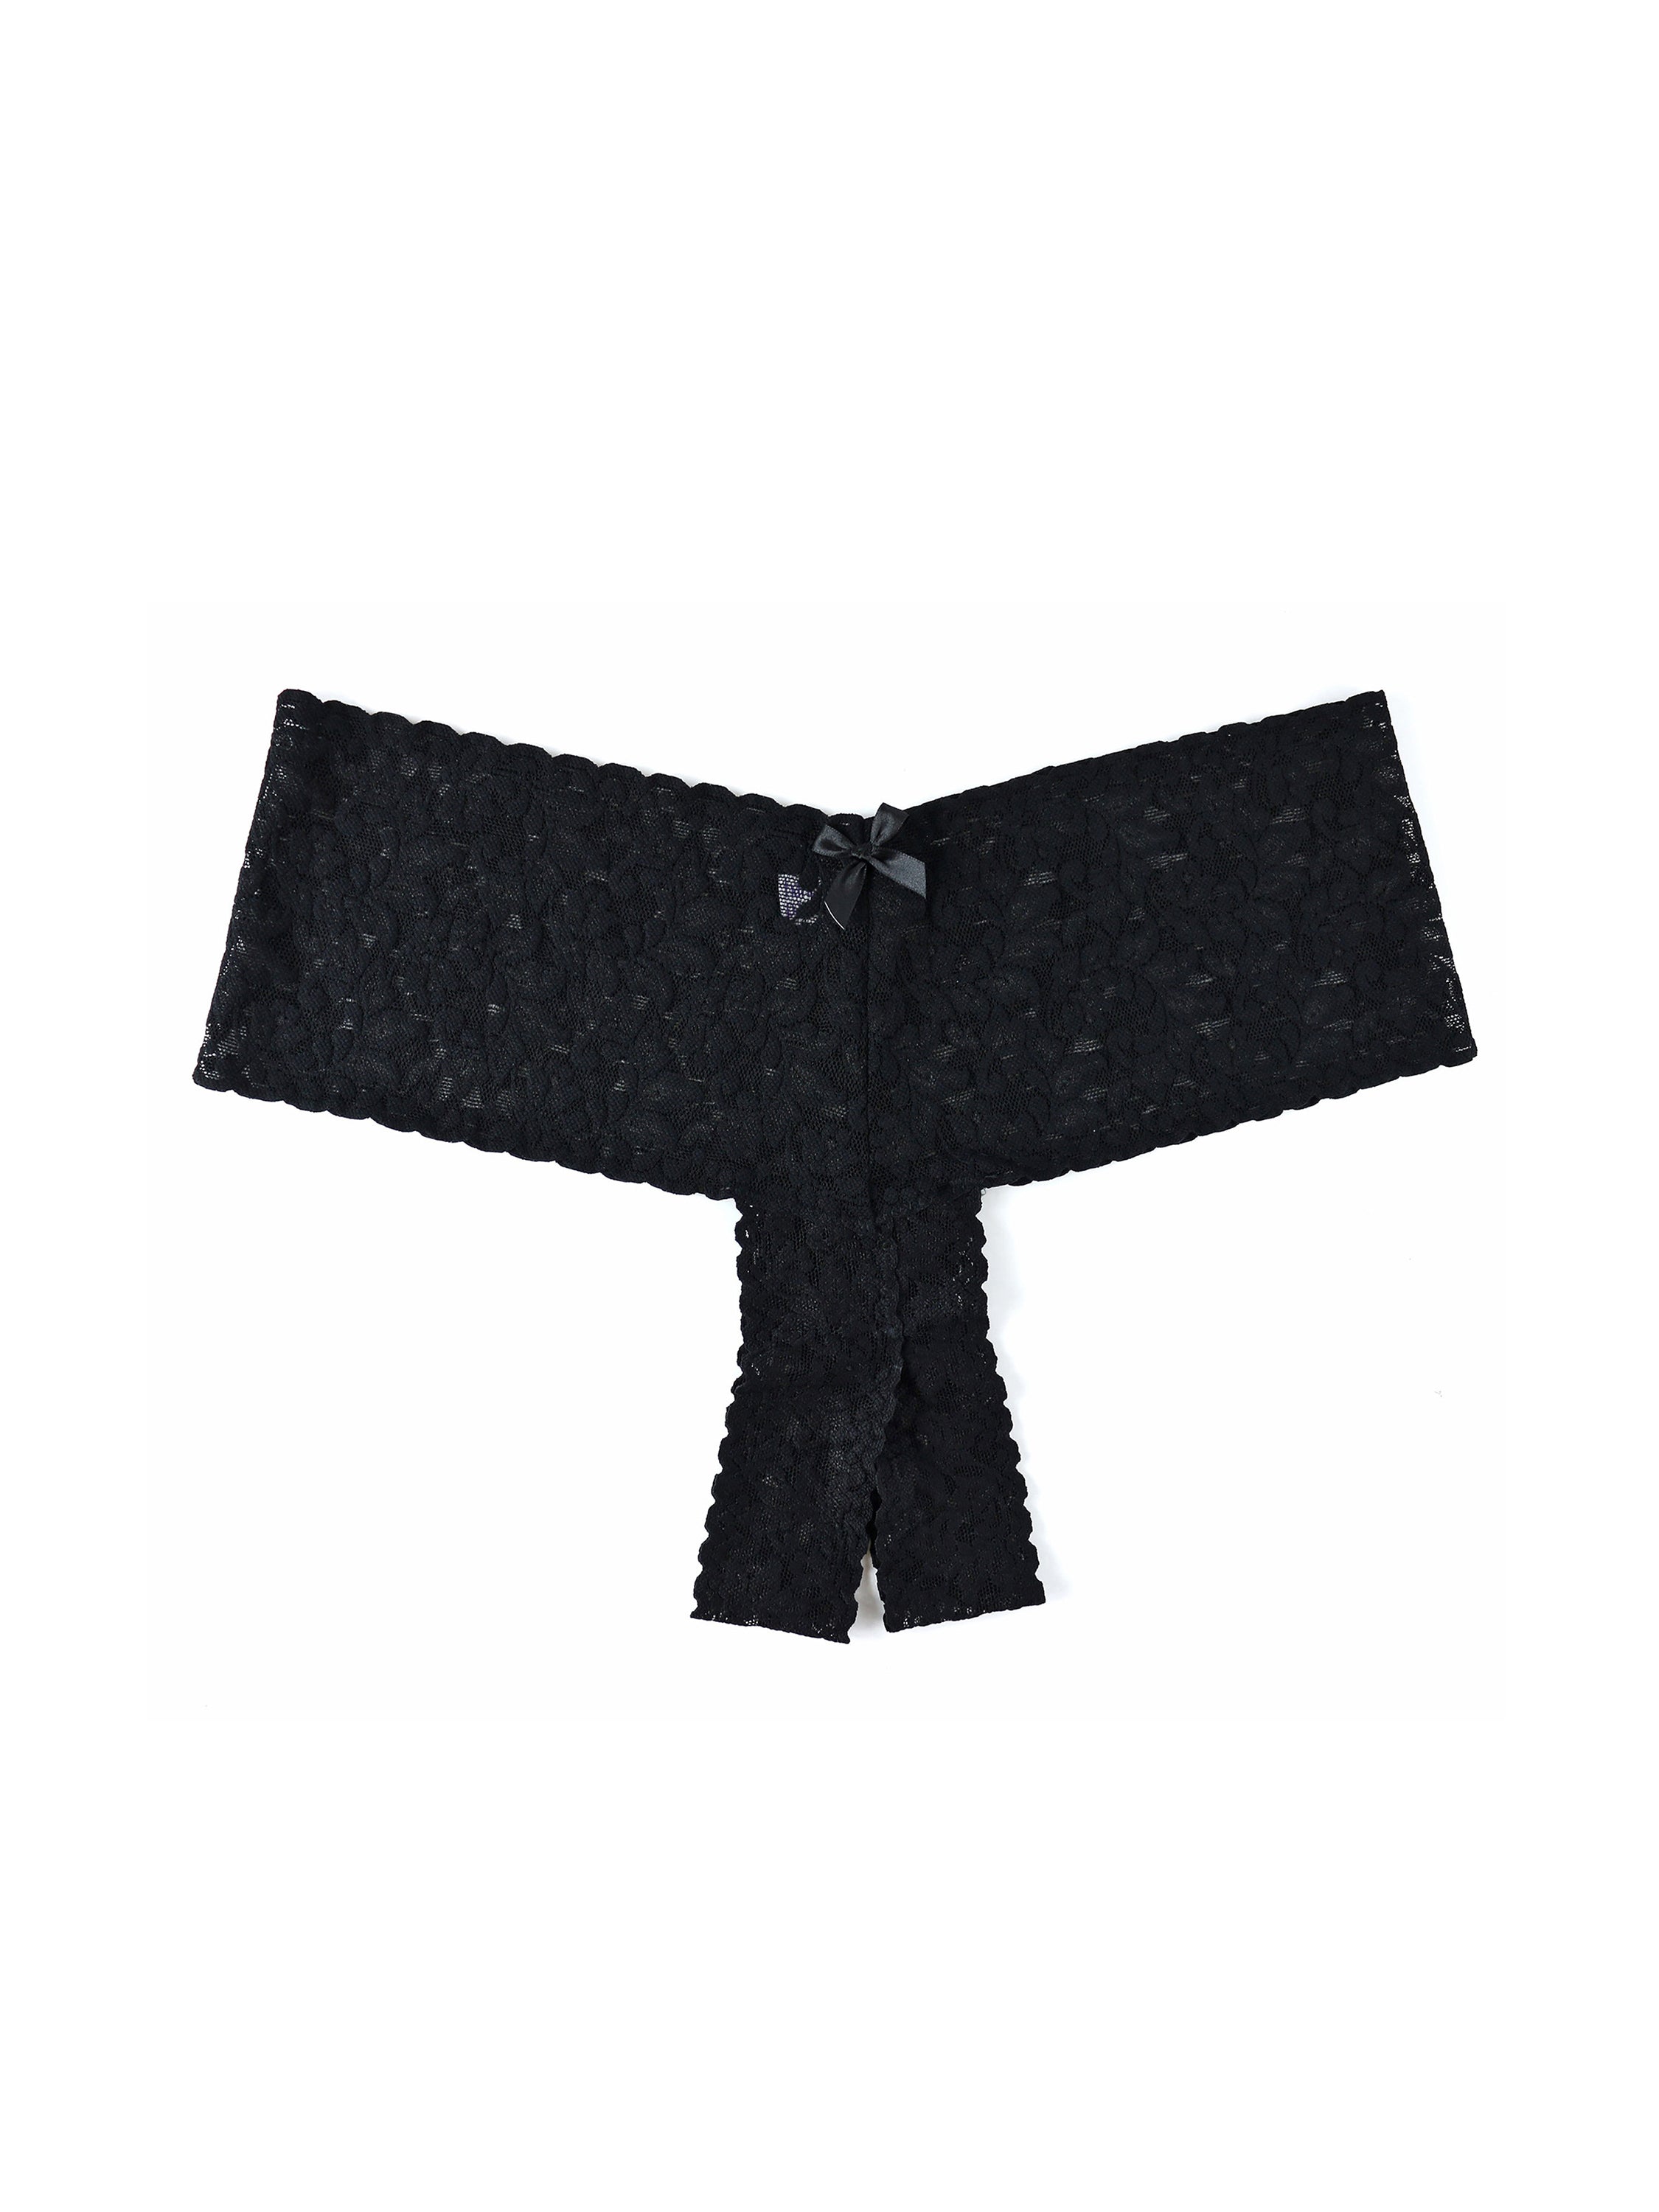 Signature Lace Crotchless Teddy Black